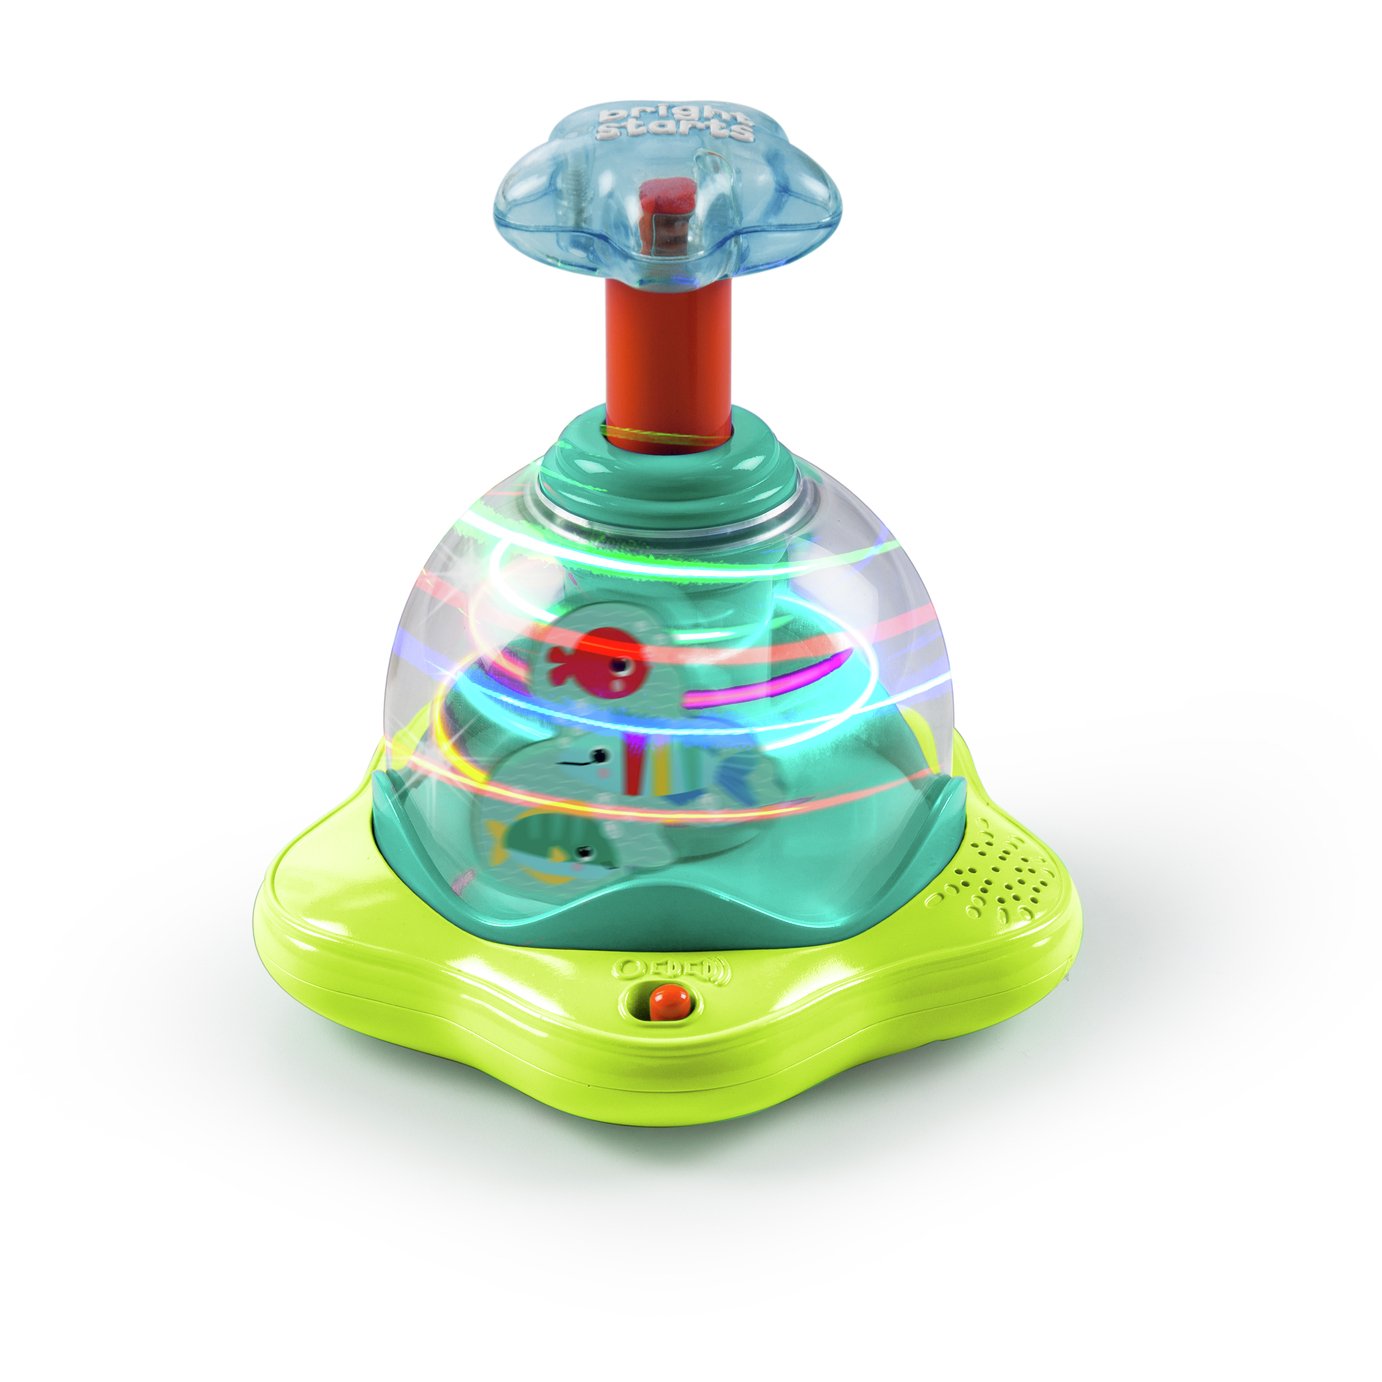 Bright Starts Press and Glow Spinner Review